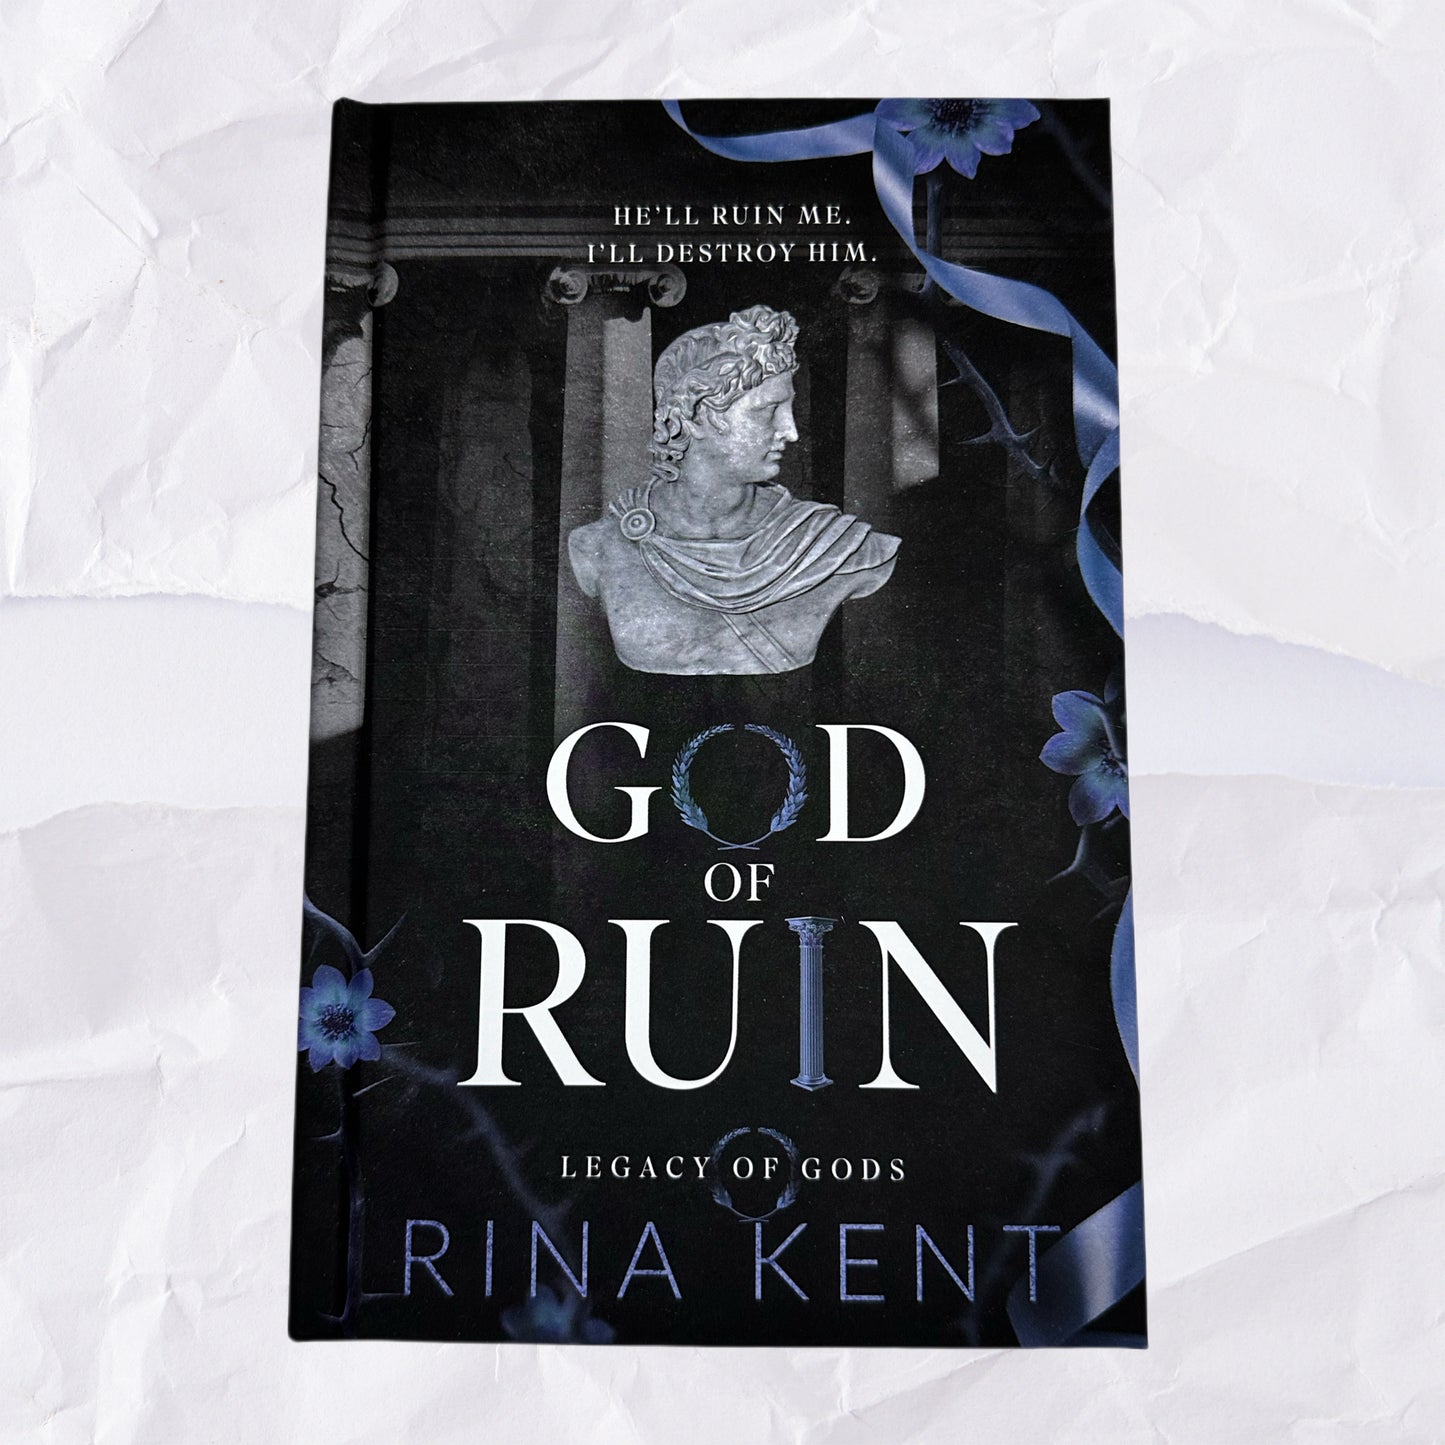 God of Ruin (Legacy of Gods #4) by Rina Kent - Special Edition Print - Hardcover